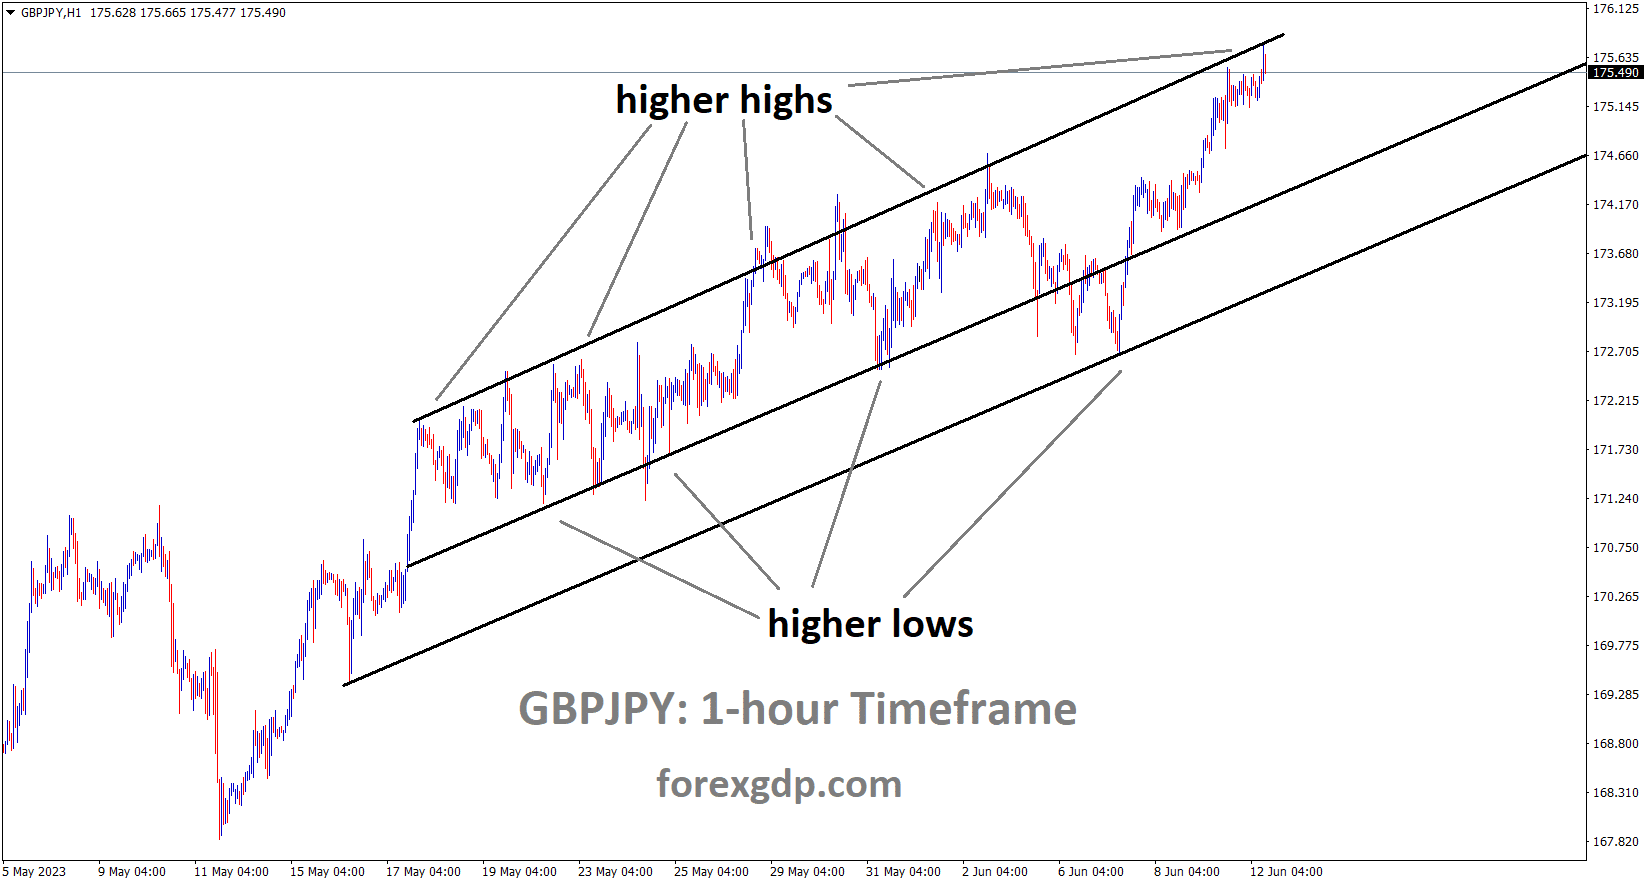 GBPJPY is moving in an Ascending channel and the market has reached the higher high area of the channel